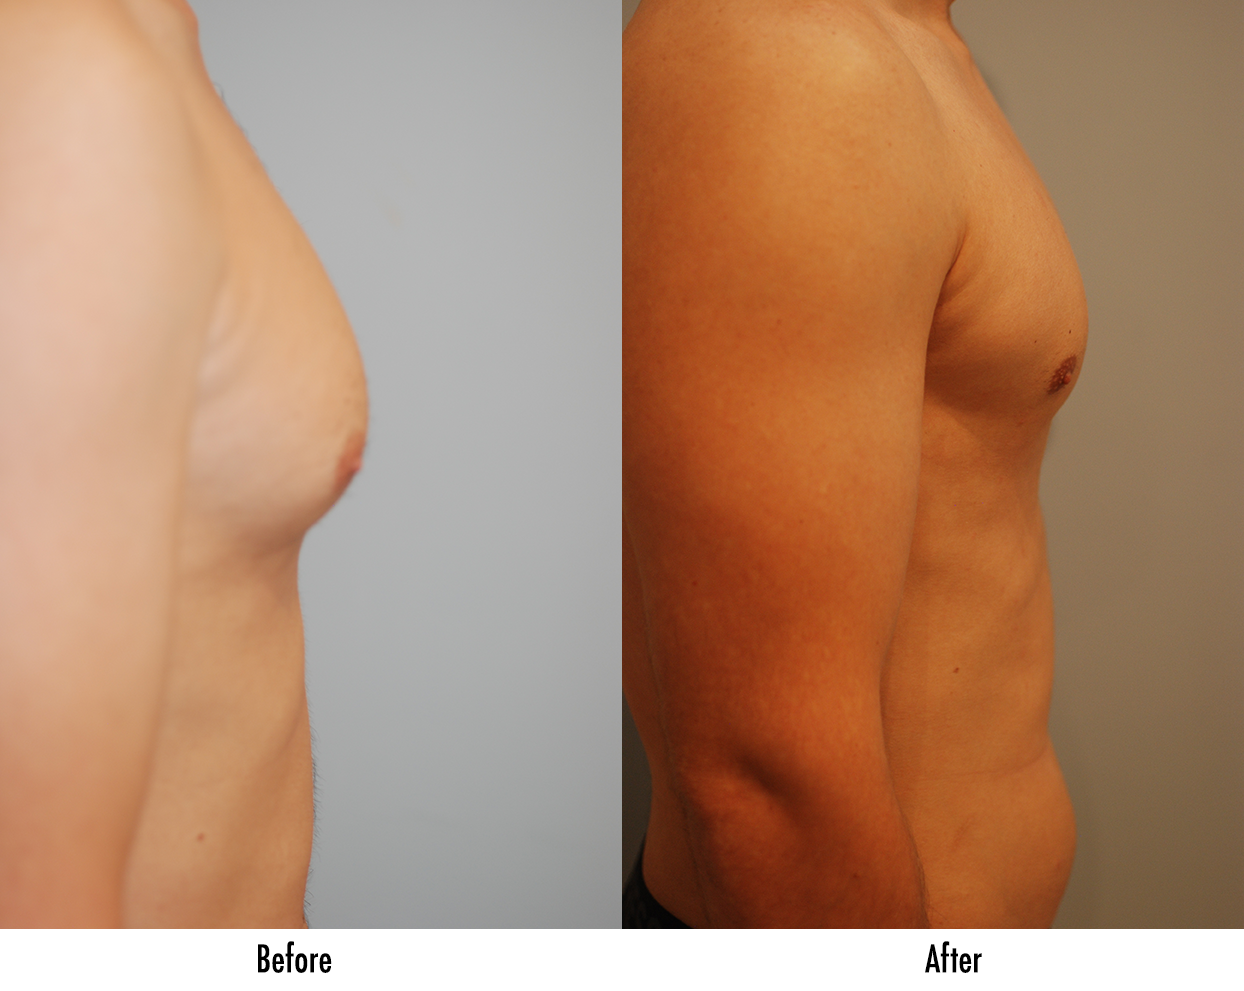 Breast Reduction and Insurance - Manhattan, NY